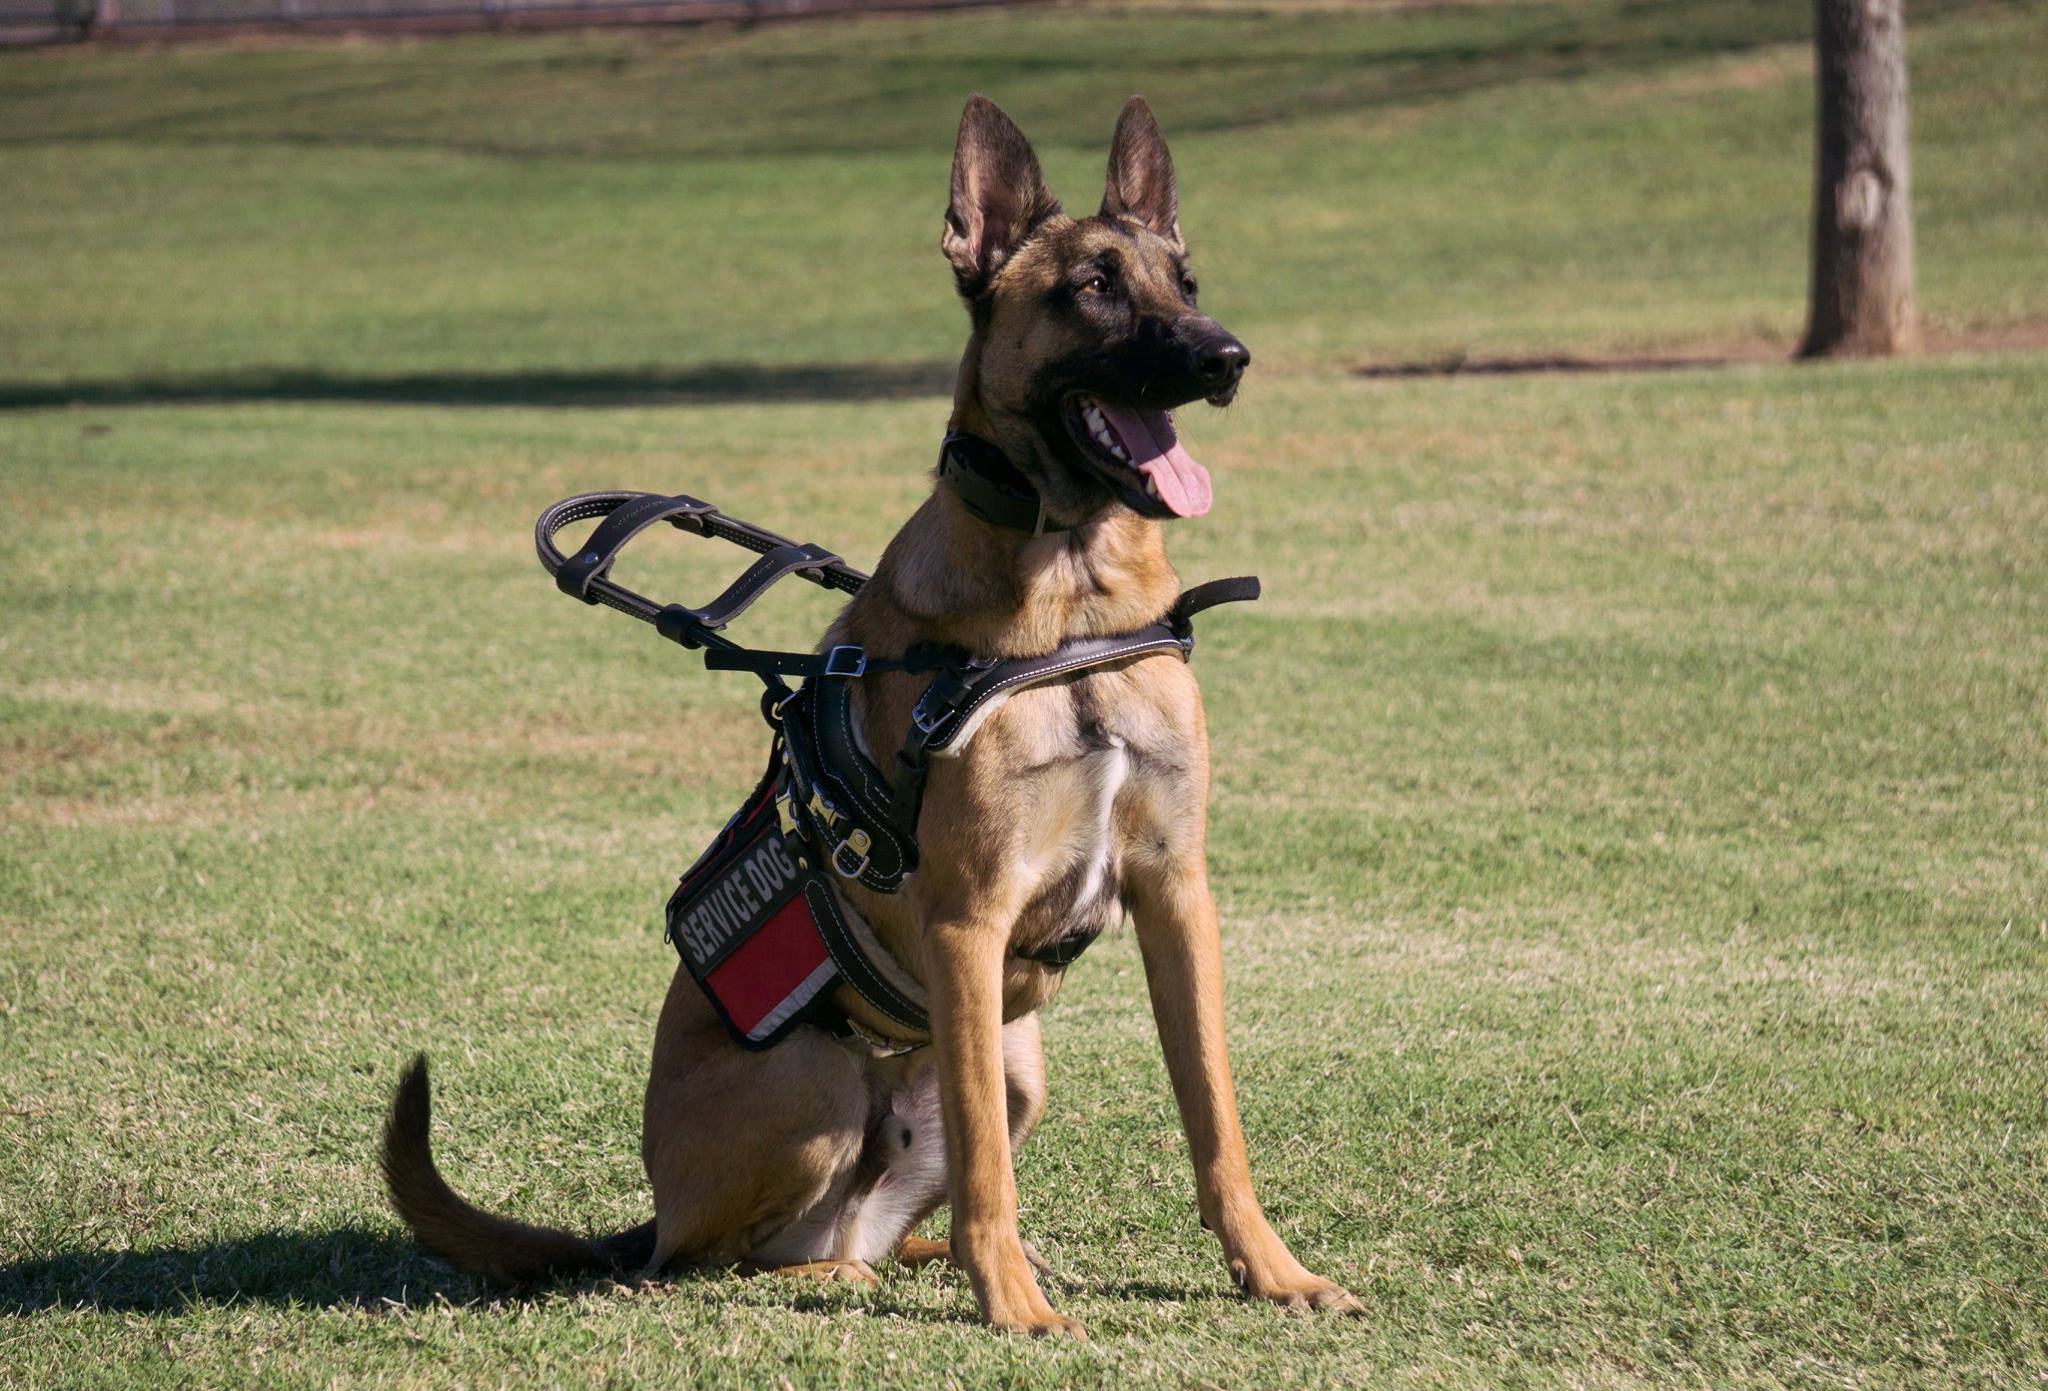 Spending Your Summer with a Service Dog in Charlotte